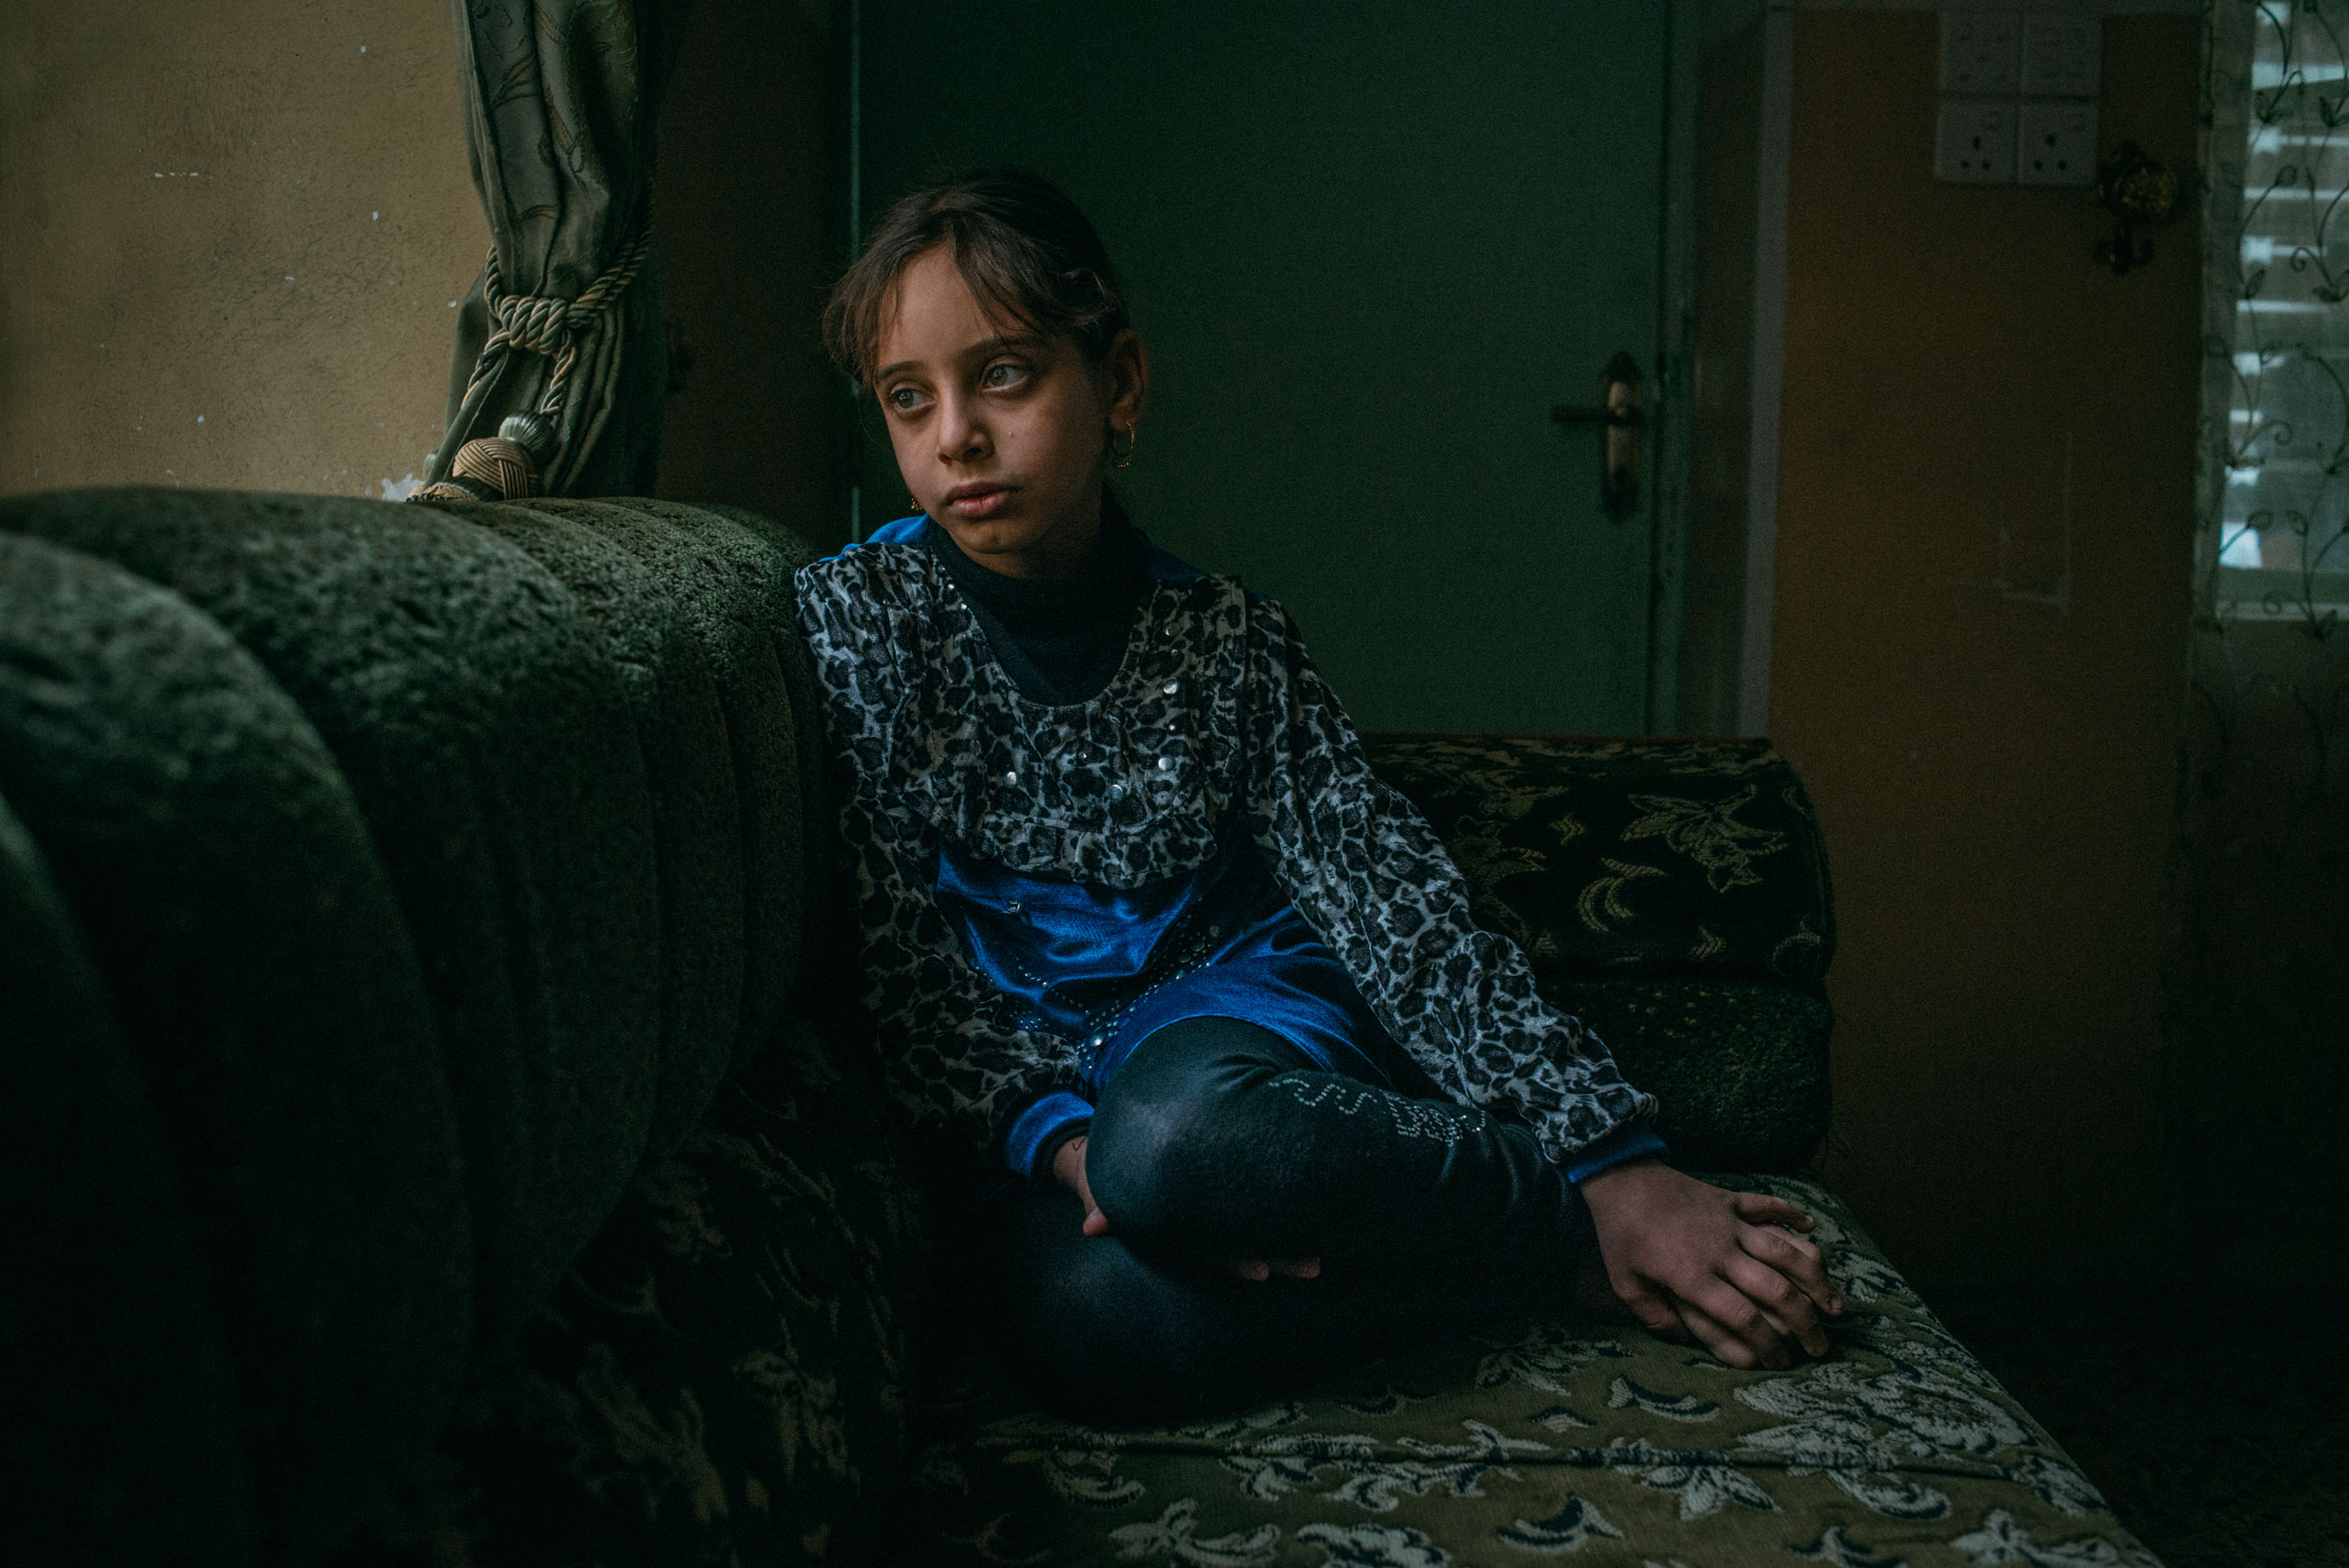 Farah el-Kelo, nine years old, lives with her extended family of dozens of people in a large house in the neighborhood of Mosul al-Jadida. After fleeing the fighting between Iraqi forces and Islamic State militants, some of the family moved in together. On April 1, she answered a few questions about her recent days in this war zone. Her most recent meal? “Yogurt, tahini and tea.” How does she fall asleep at night? “I sleep okay, but I used to sleep better before [the battle].” Her favorite toy? “A kitchen with pots and pans.” And what does she want to be when she’s older? “A doctor.”